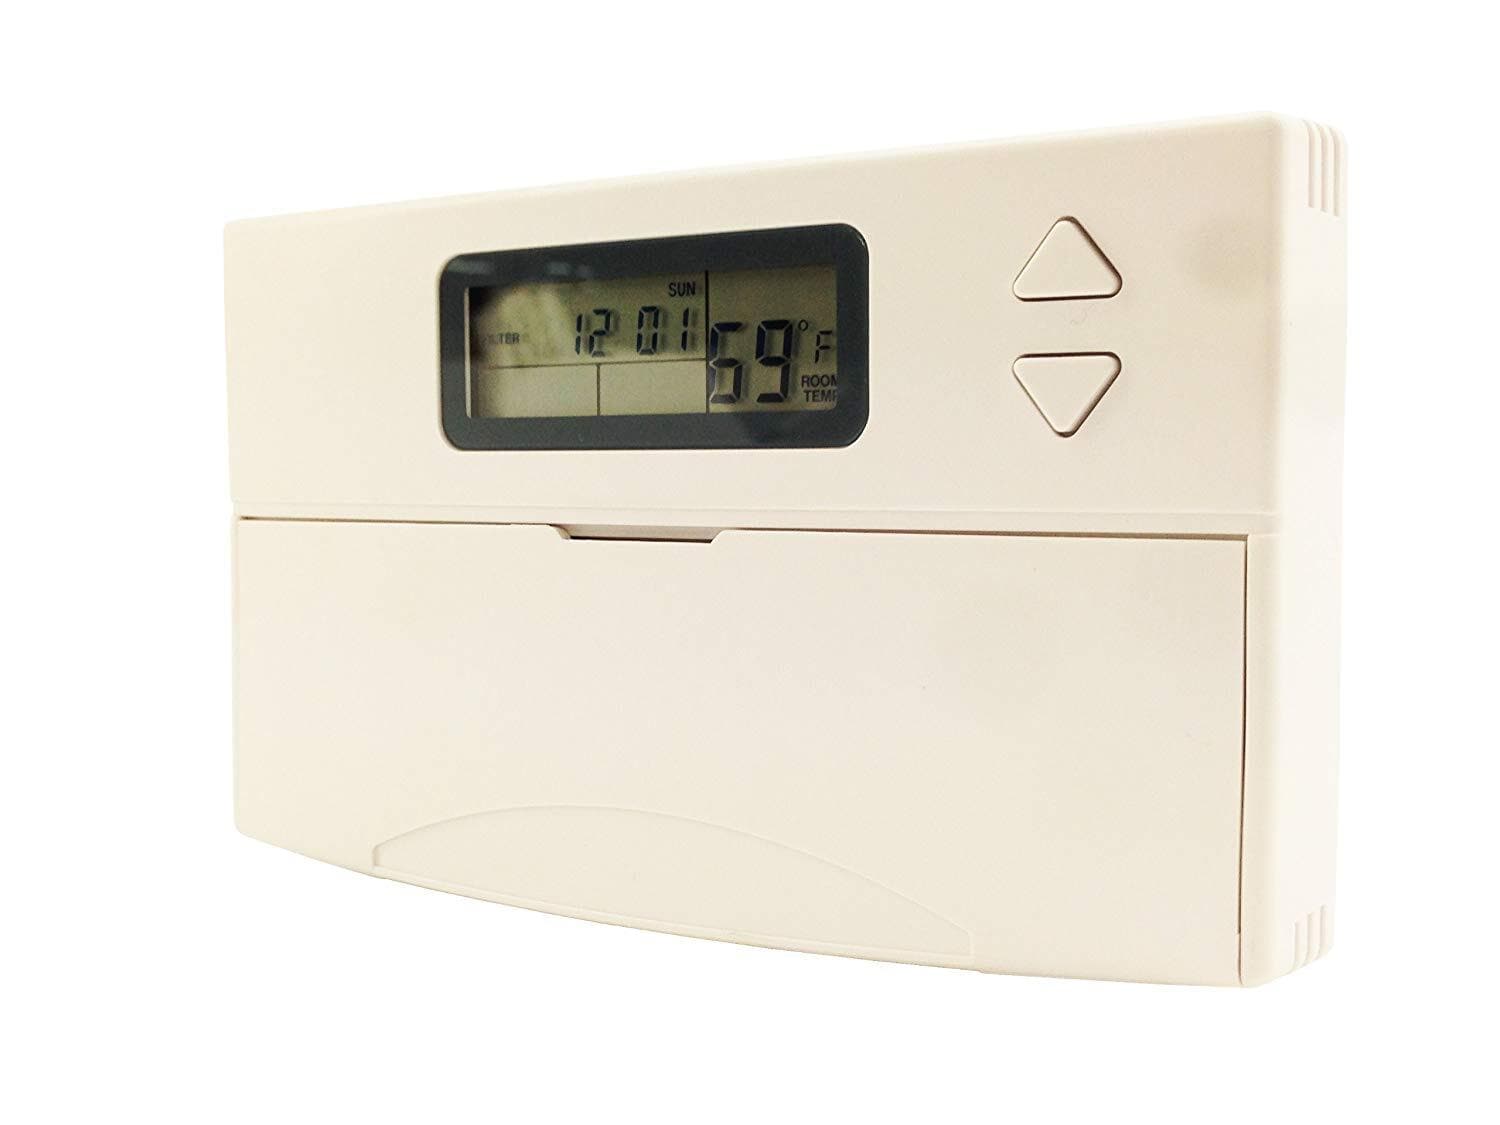 KING 24-Volt 5-1-1 Day Programmable Thermostat in the Programmable